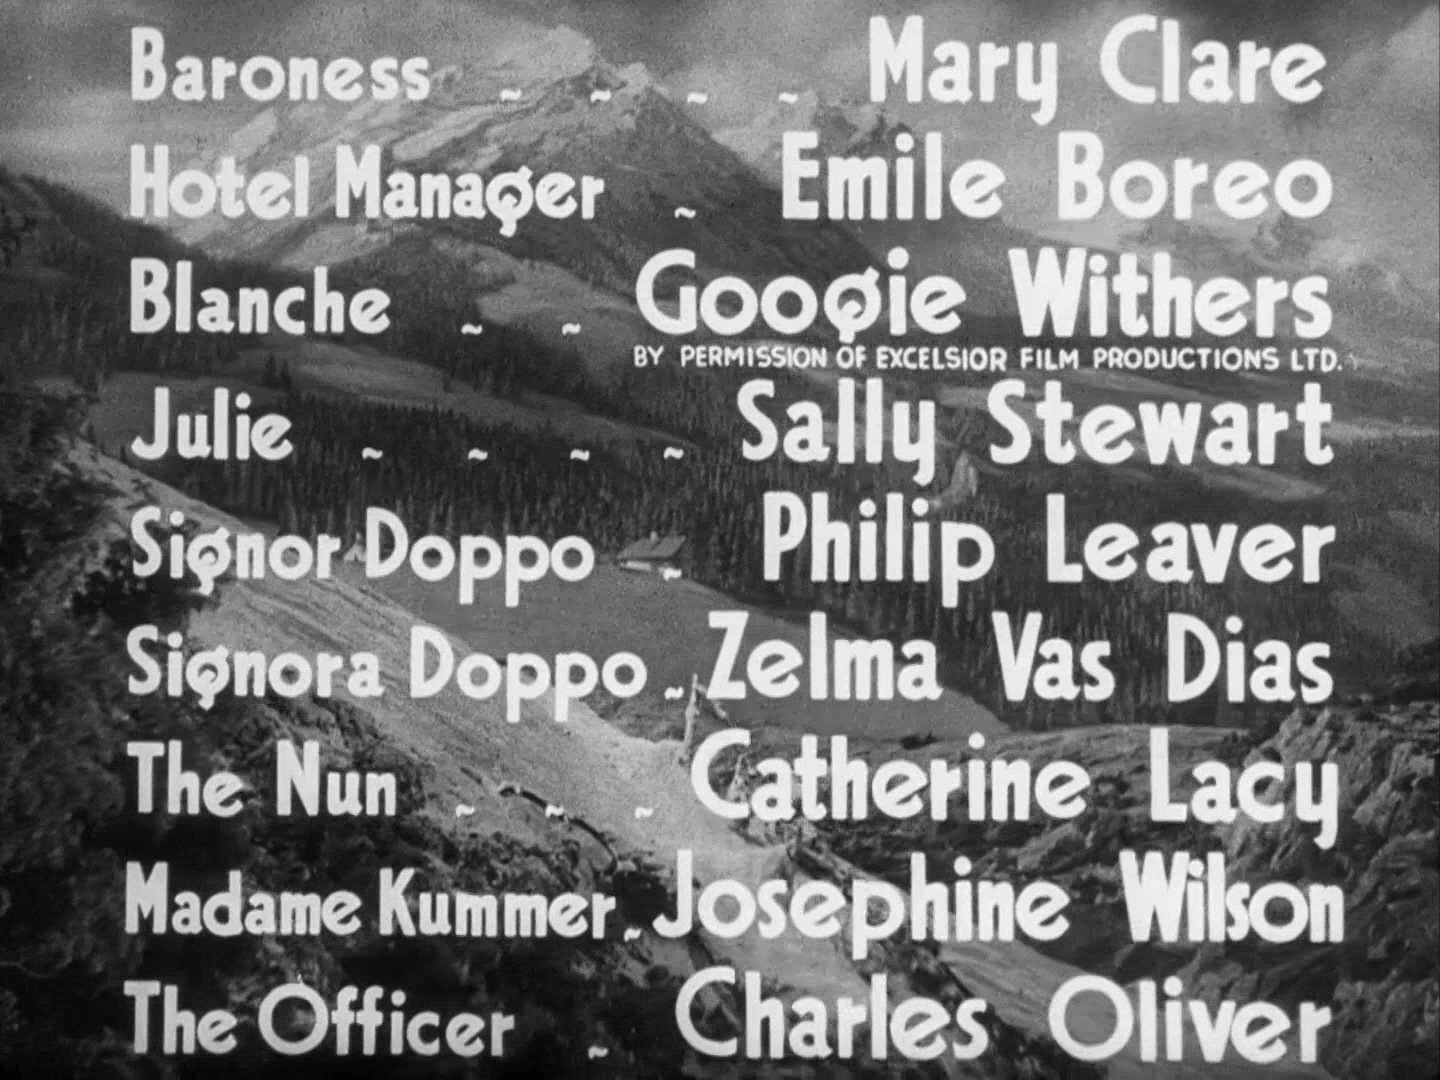 Main title from The Lady Vanishes (1938) (7). Mary Clare, Emile Boreo, Googie Withers, Sally Stewart, Philip Leaver, Zelma Vaz Dias